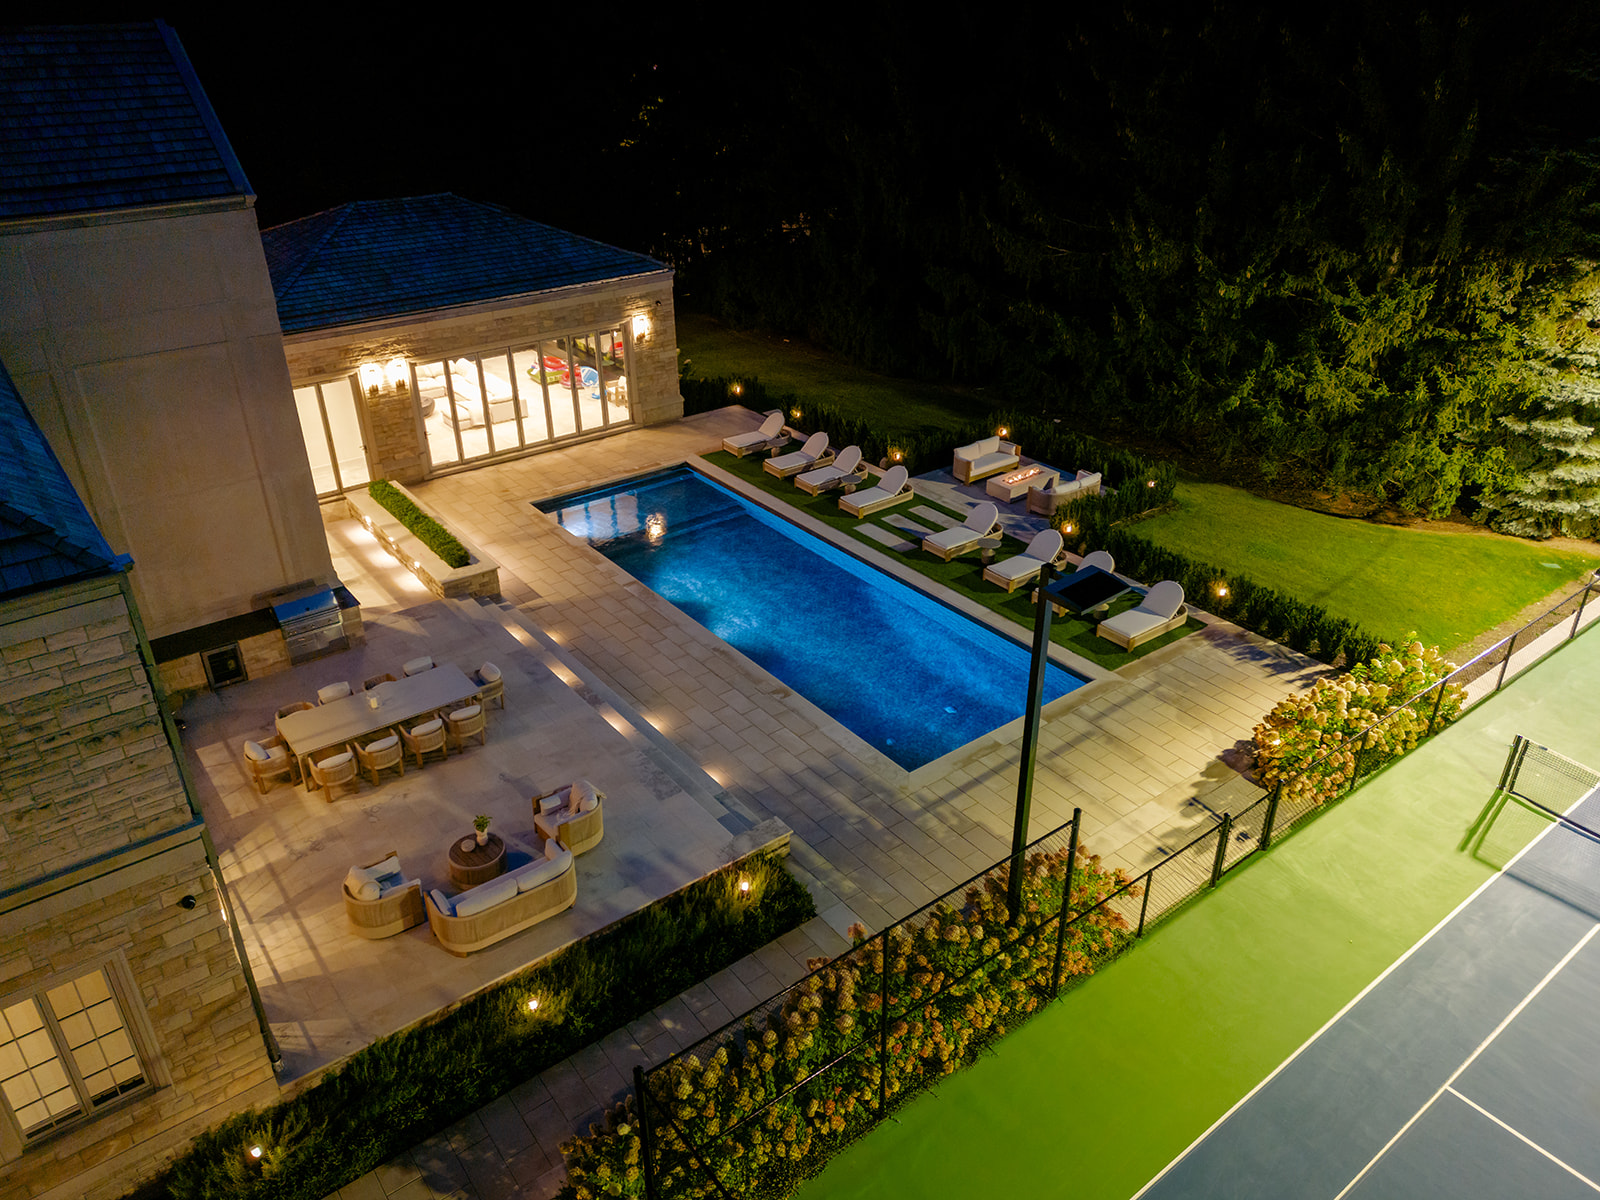 A done-shot of the backyard with the inground pool and tennis court lit up.